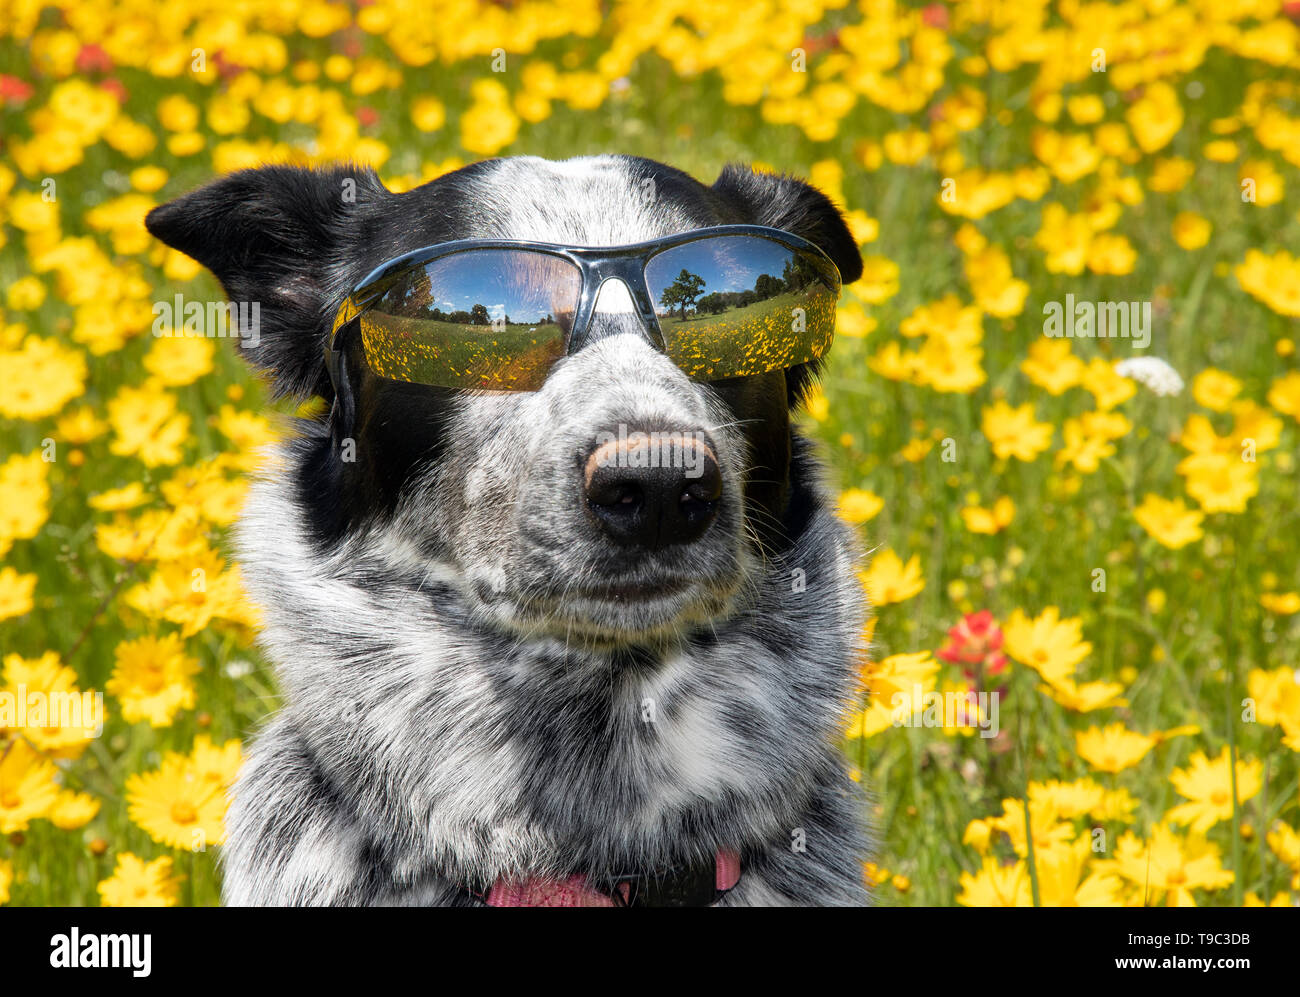 Cool black and white dog wearing shades on a sunny day, with a bright yellow spring flower background Stock Photo